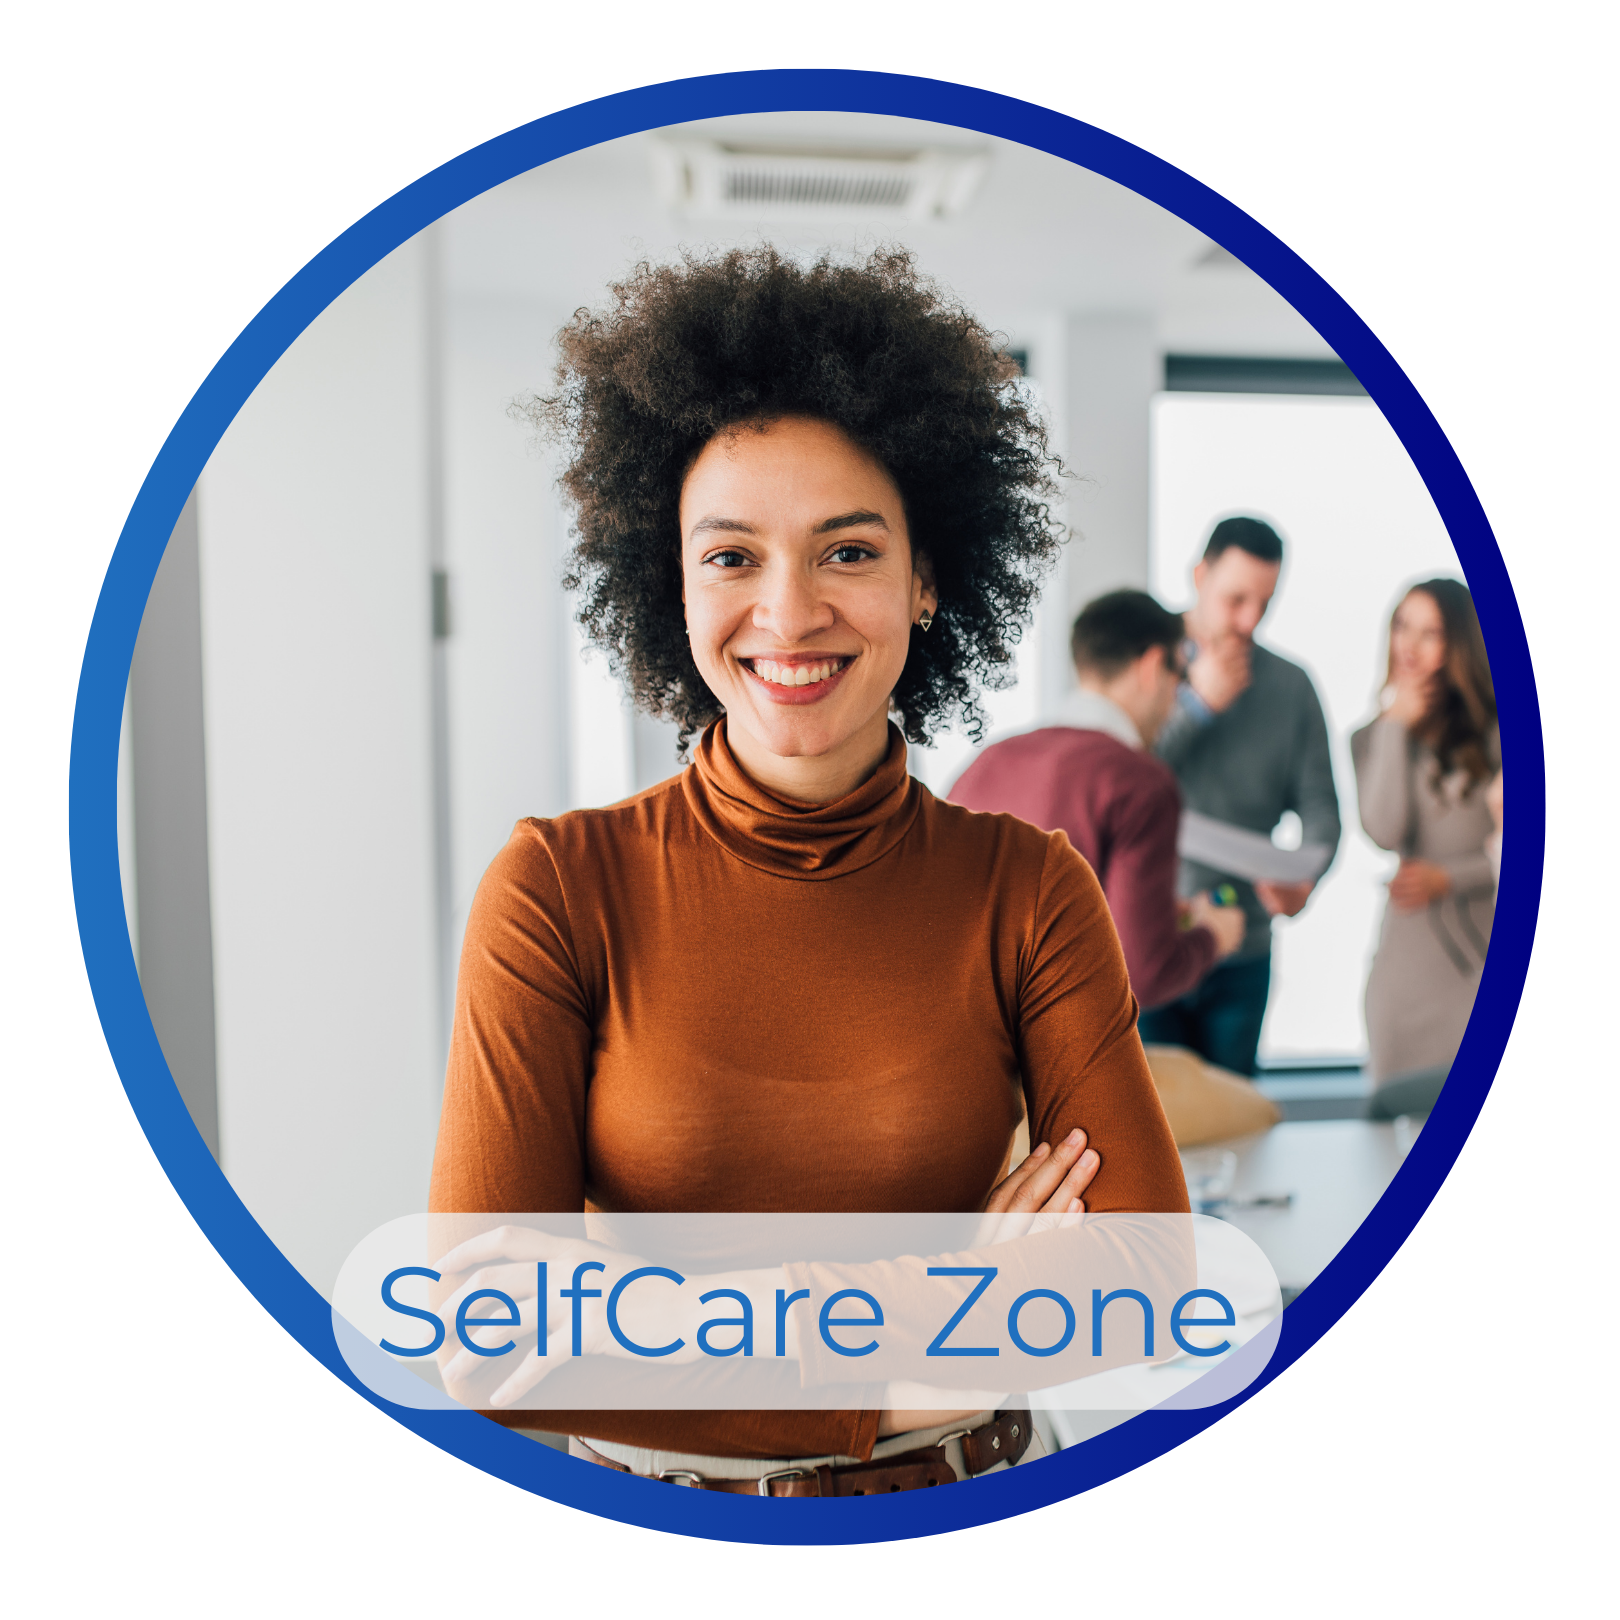 Click here to access SelfCare Zone by Huge TNS